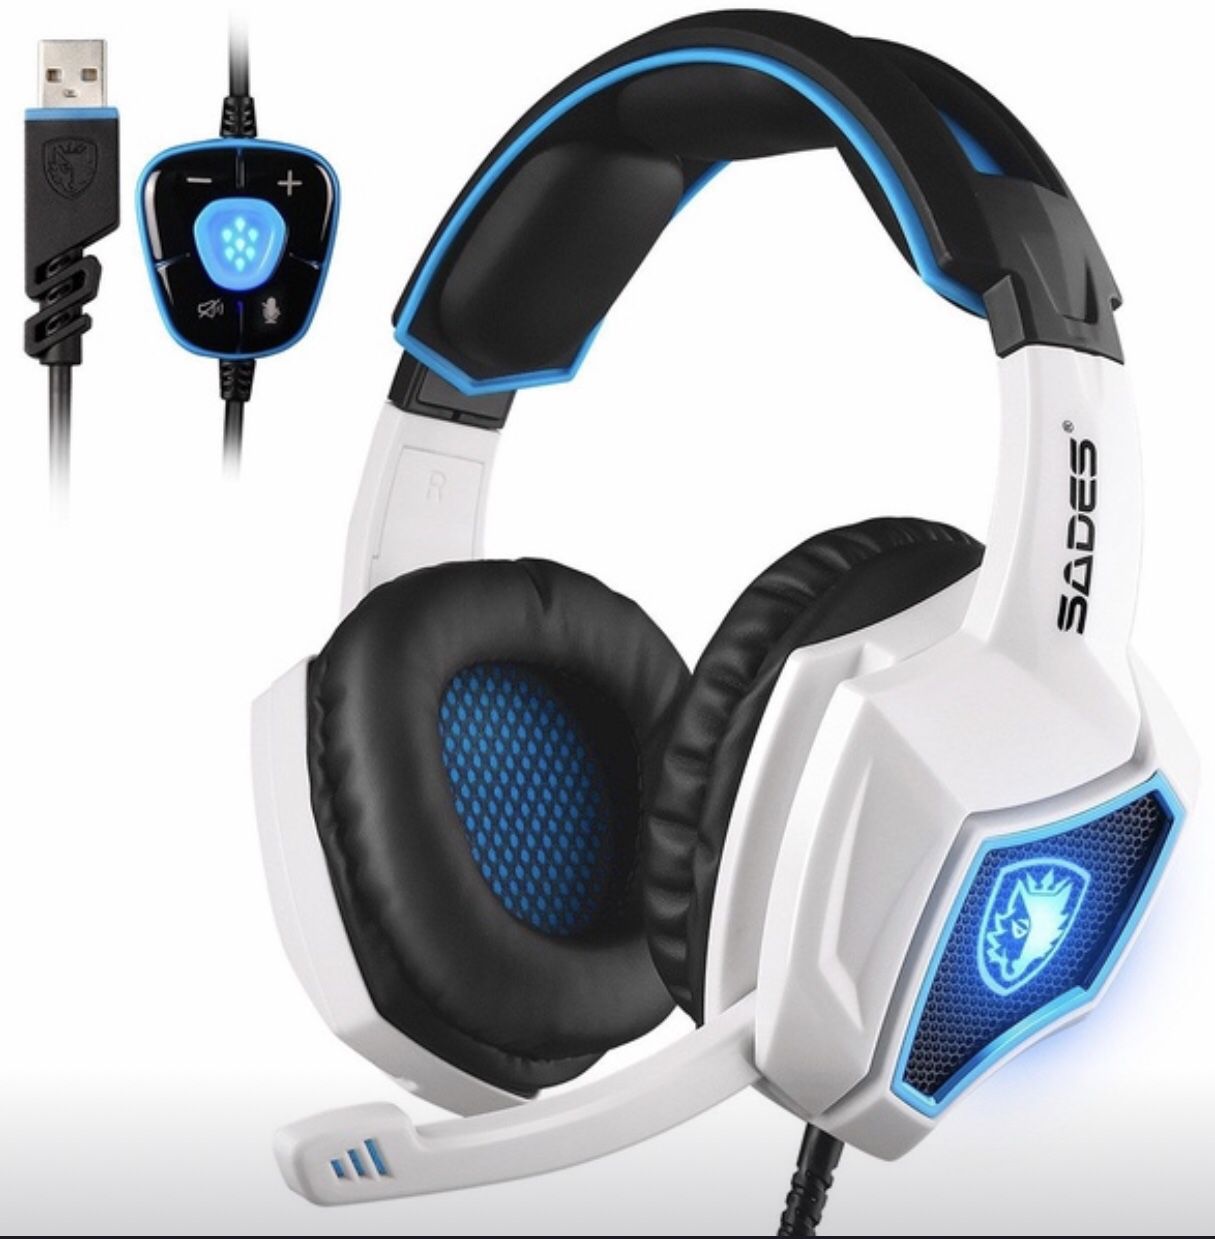 SADES Spirit Wolf 7.1 Surround Stereo Sound USB Computer Gaming Headset with Mic